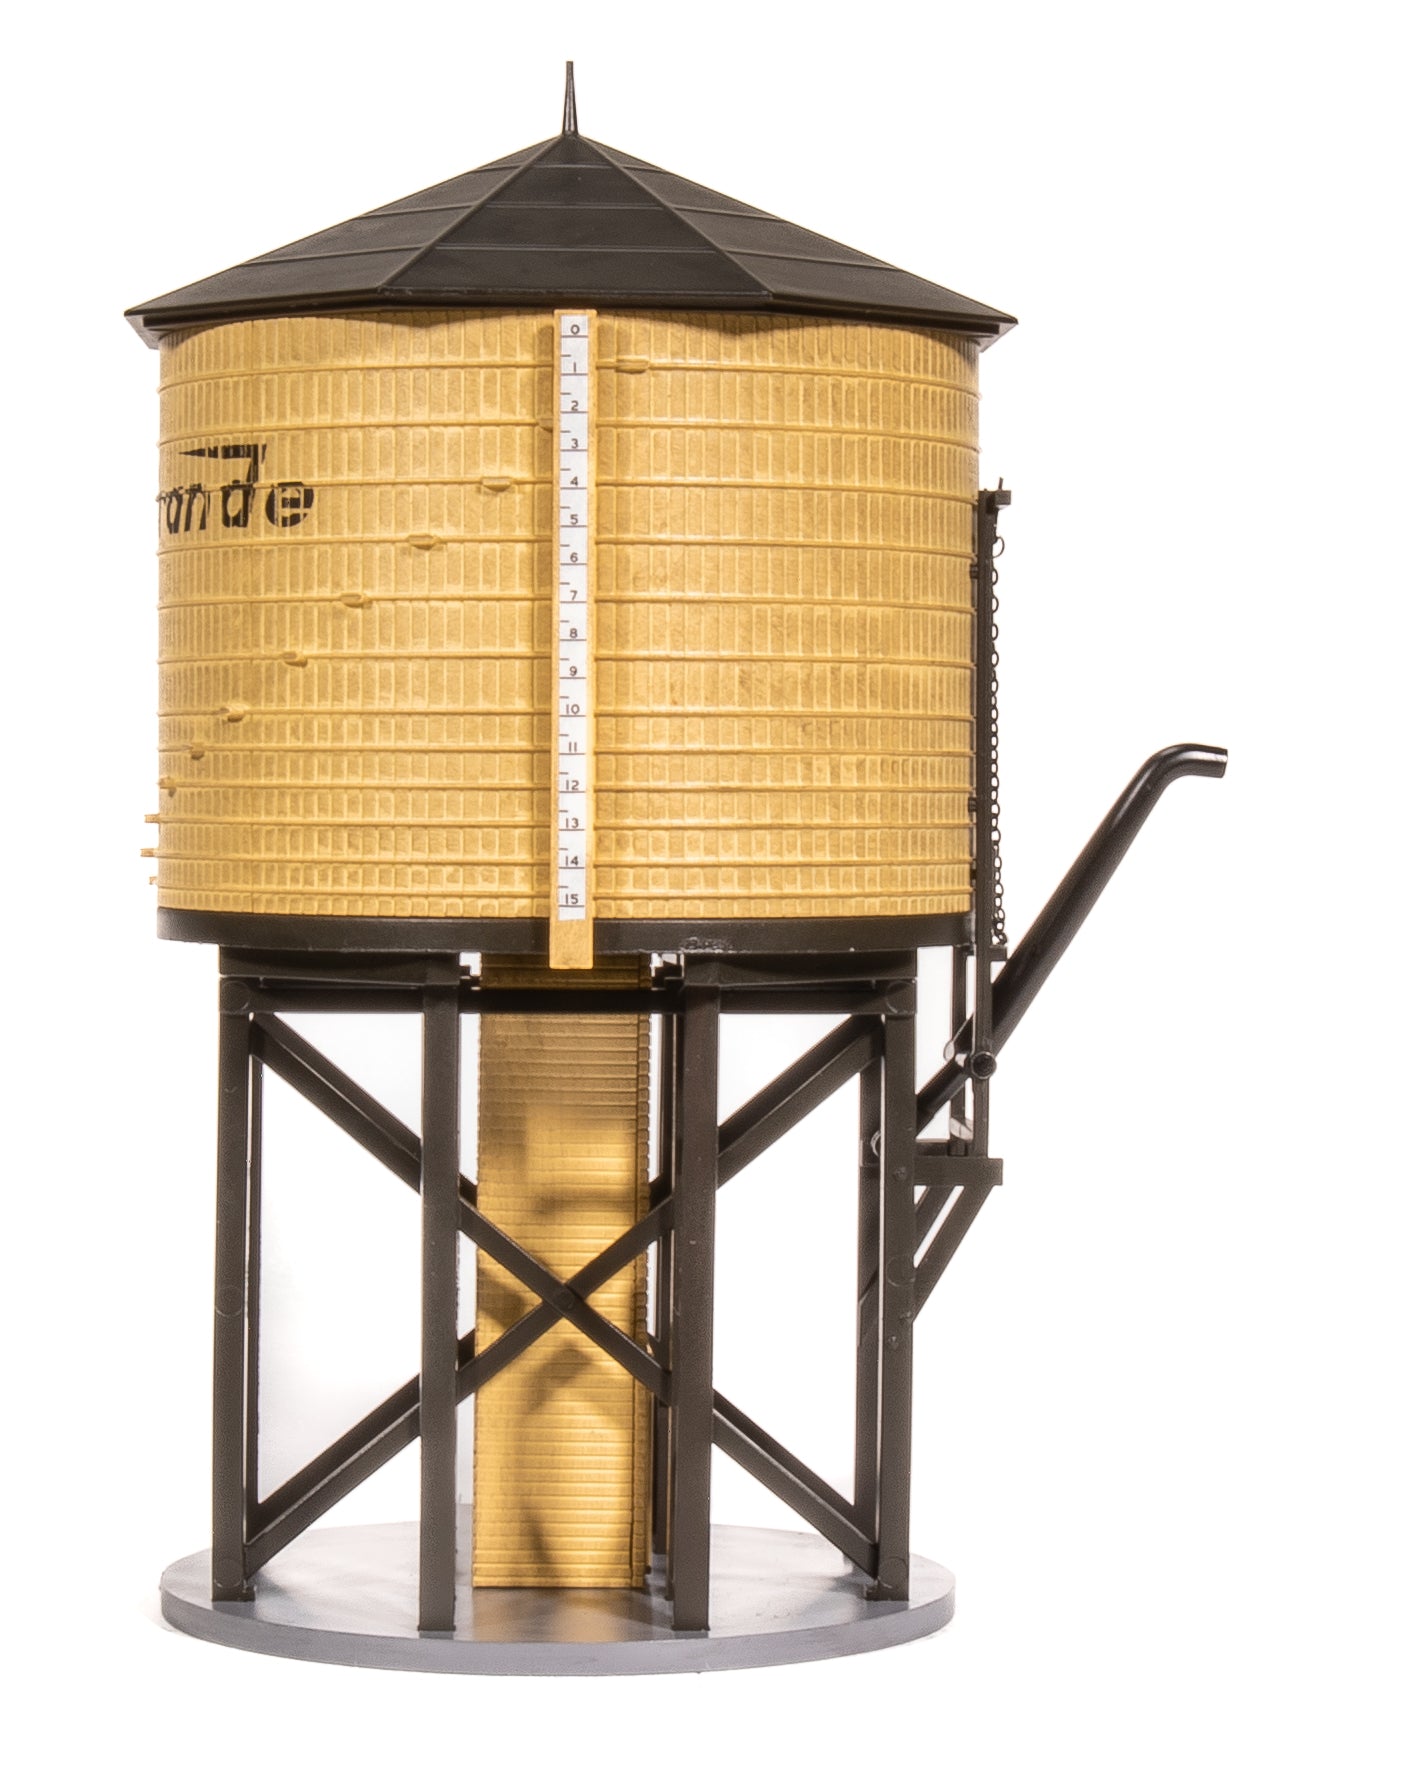 7917 Operating Water Tower w/ Sound, DRGW, Weathered, HO Default Title